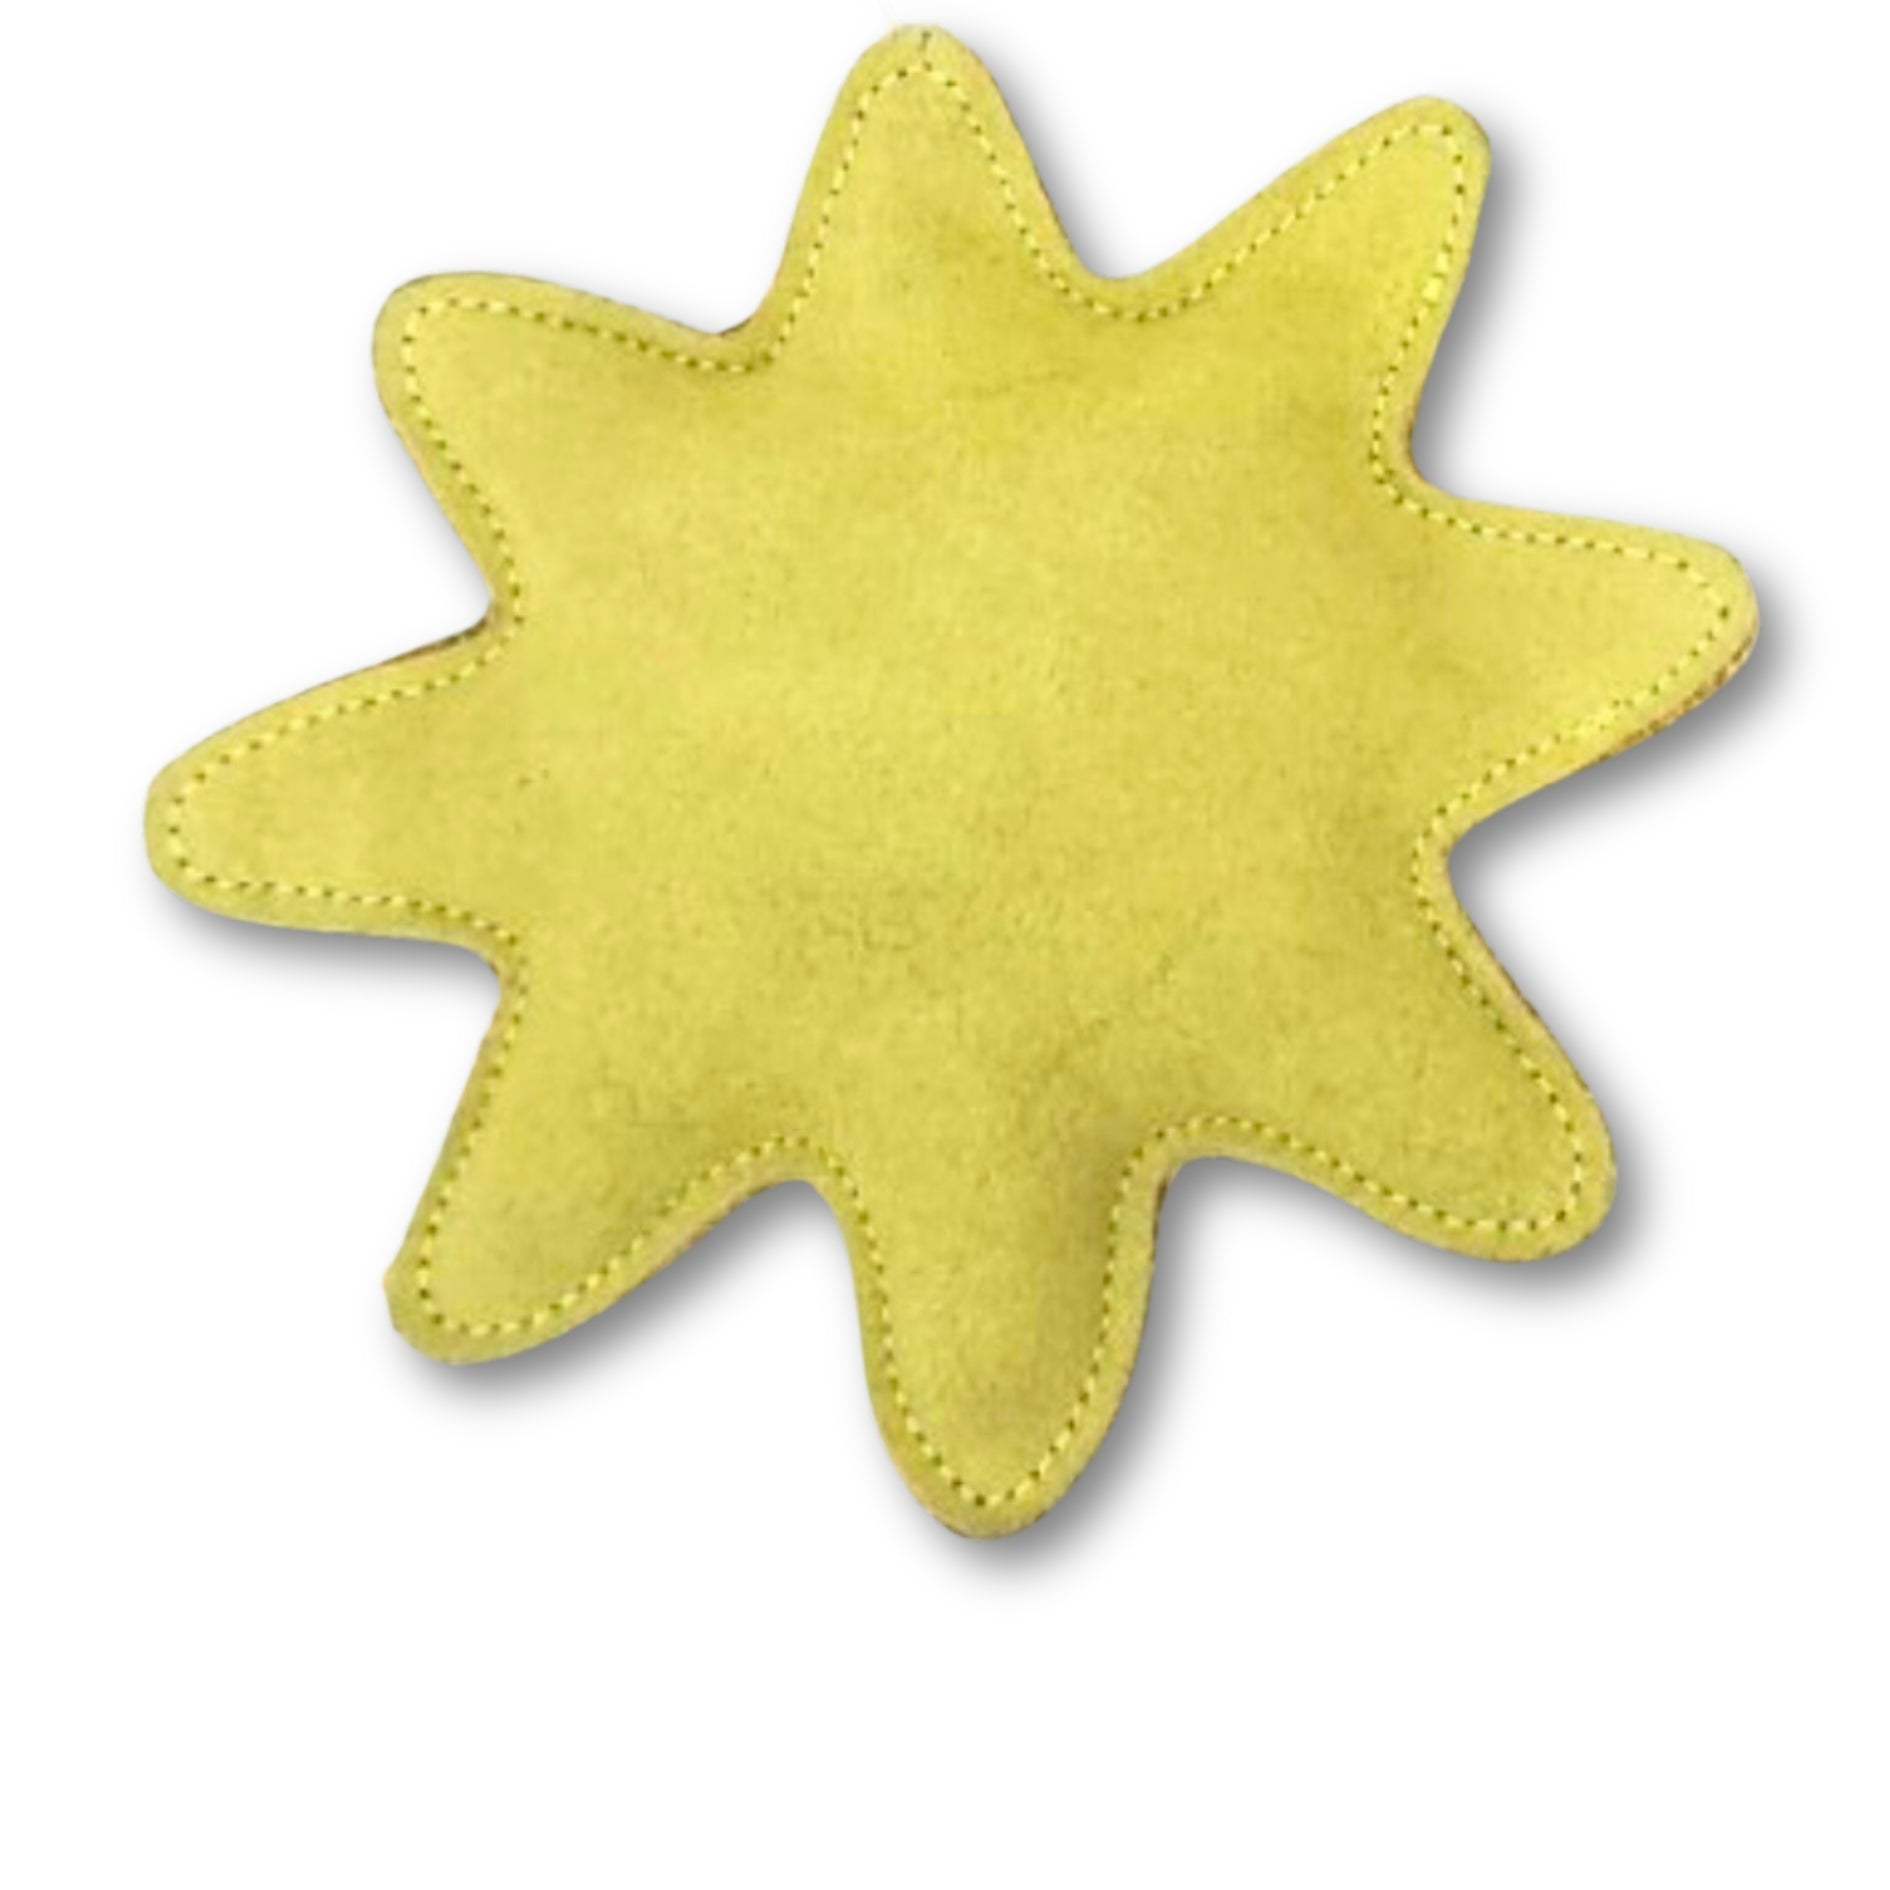 A compostable dog toy, shaped like a yellow star, on a white background by Georgie Paws.